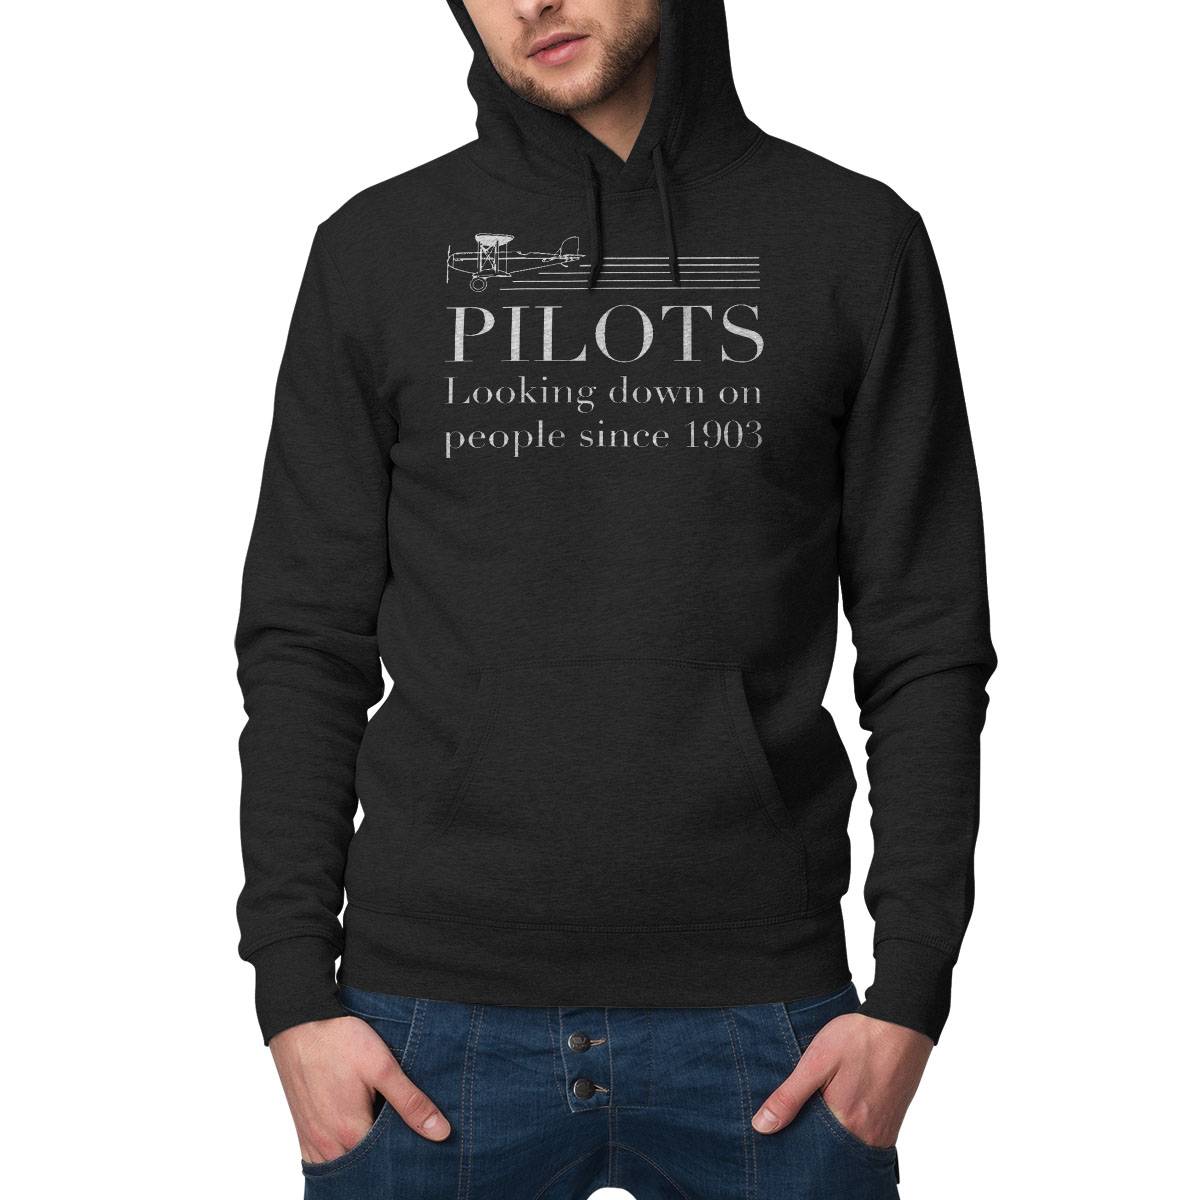 Pilots - Looking Down On People Since 1903